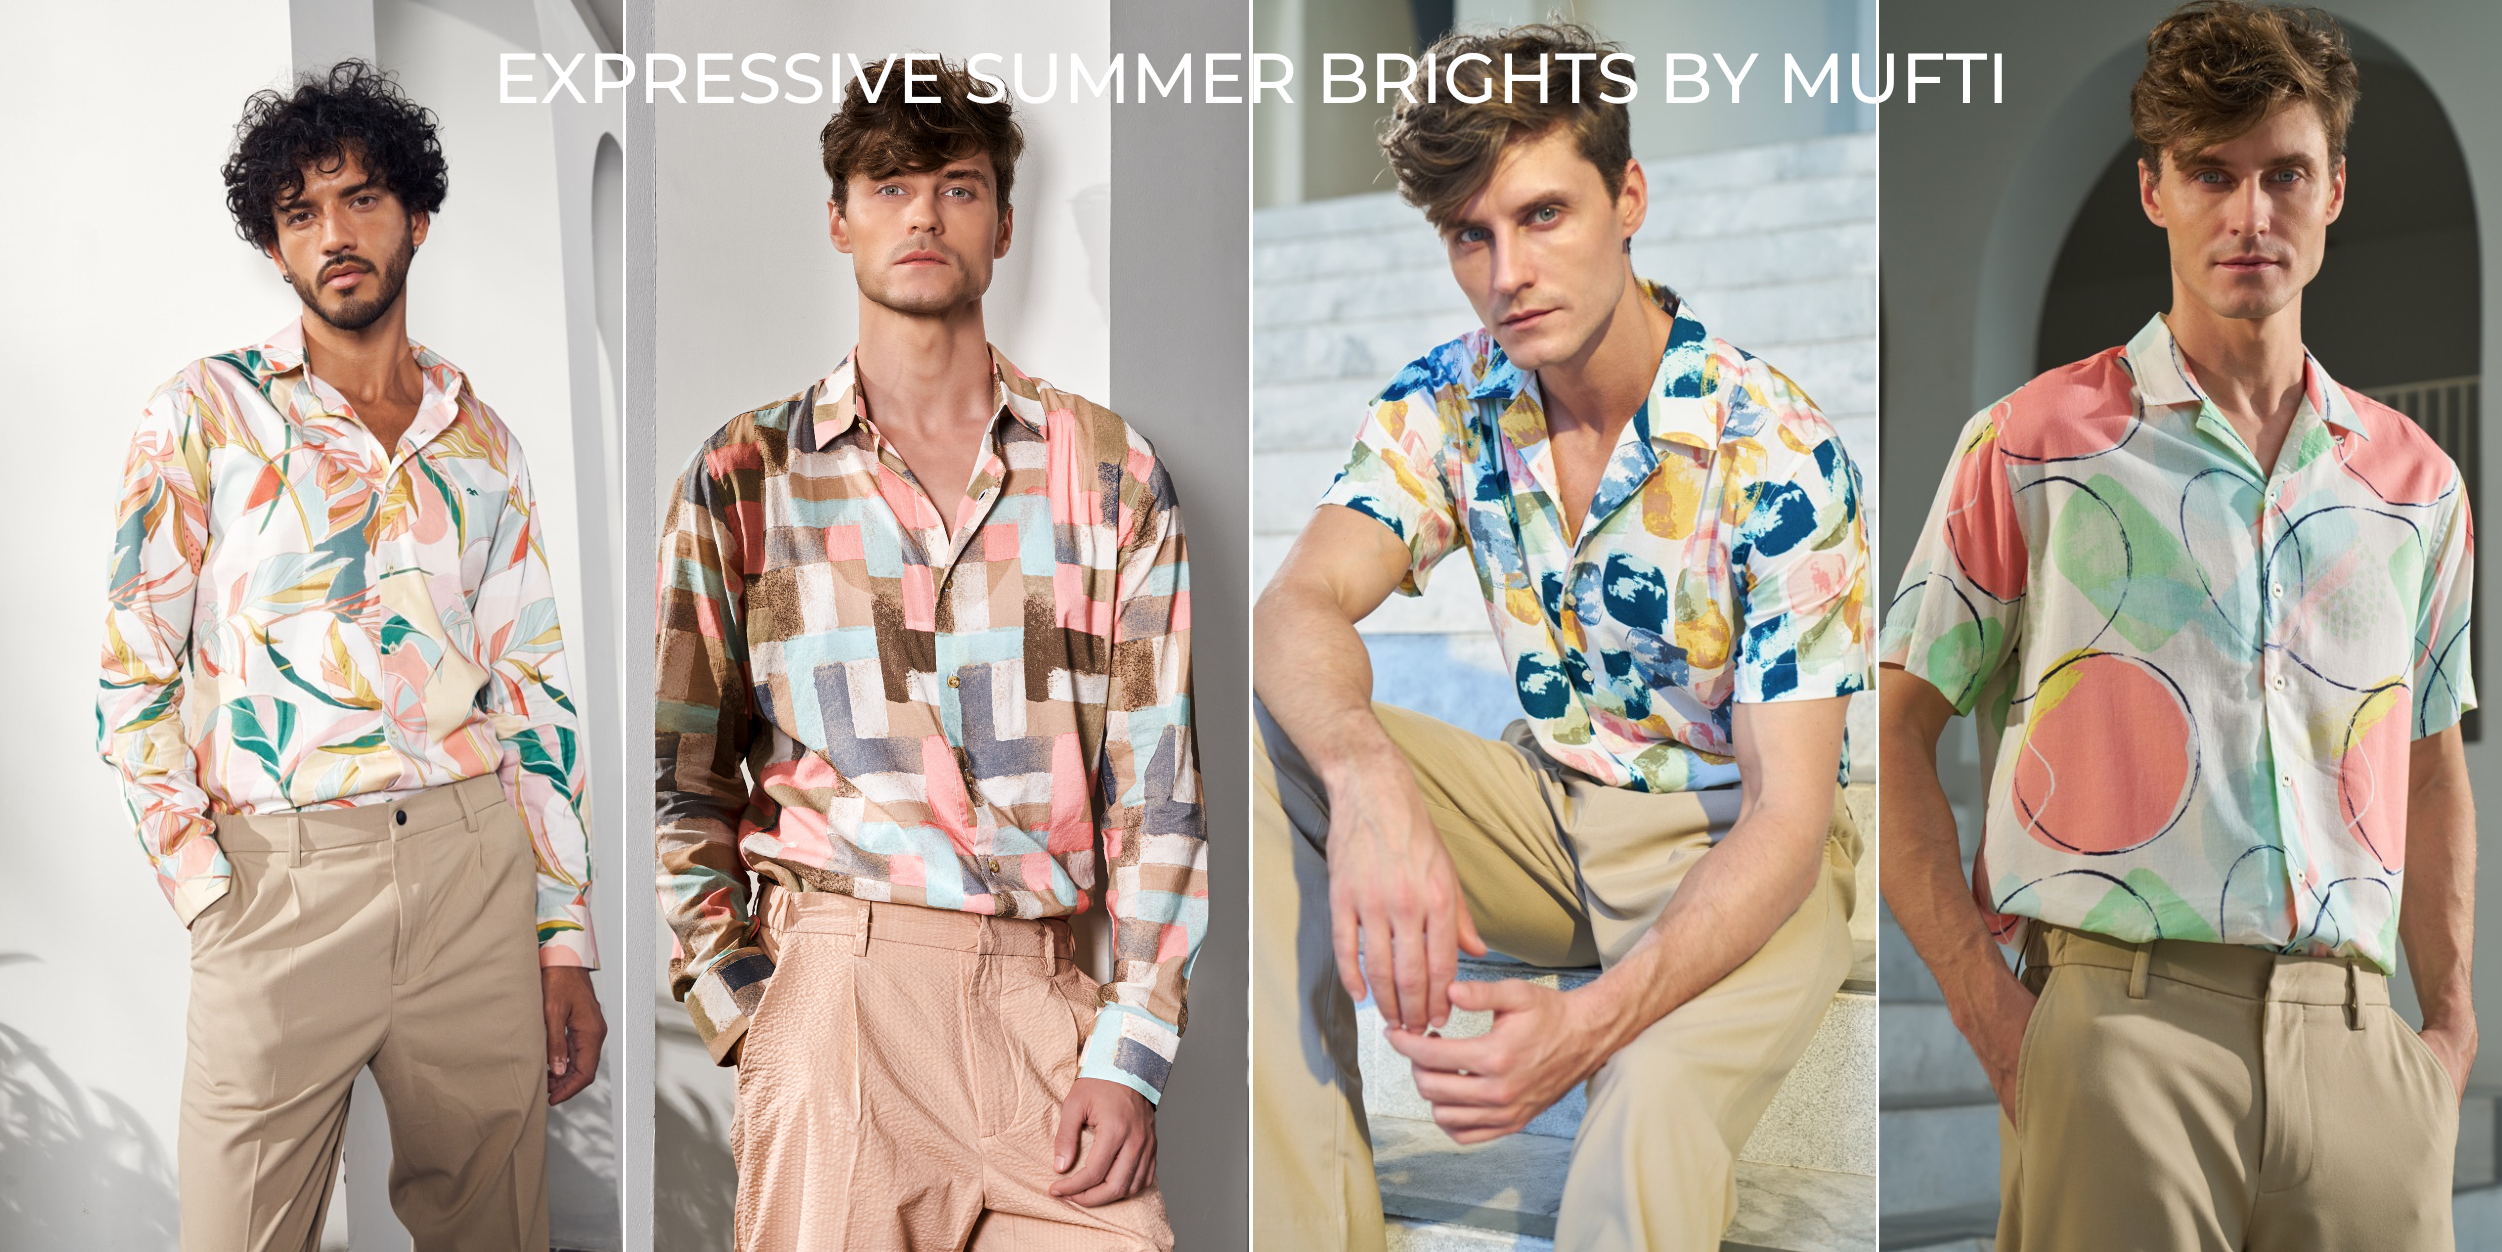 Expressive Summer Brights by Mufti